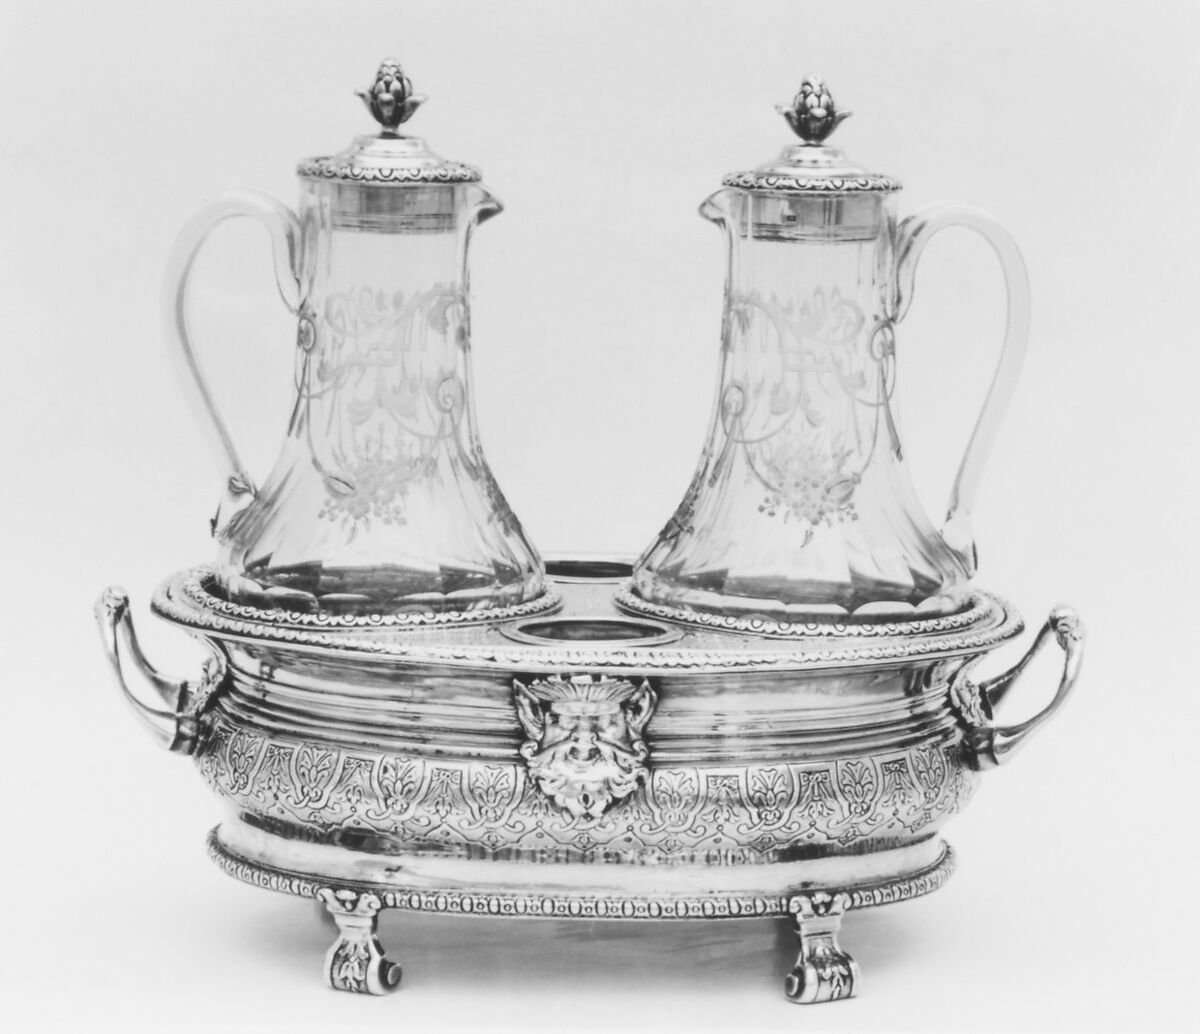 Cruet frame with later glass bottles, Richard Jarry (1678–1759, master 1708, retired 1756), Silver, French, Paris 